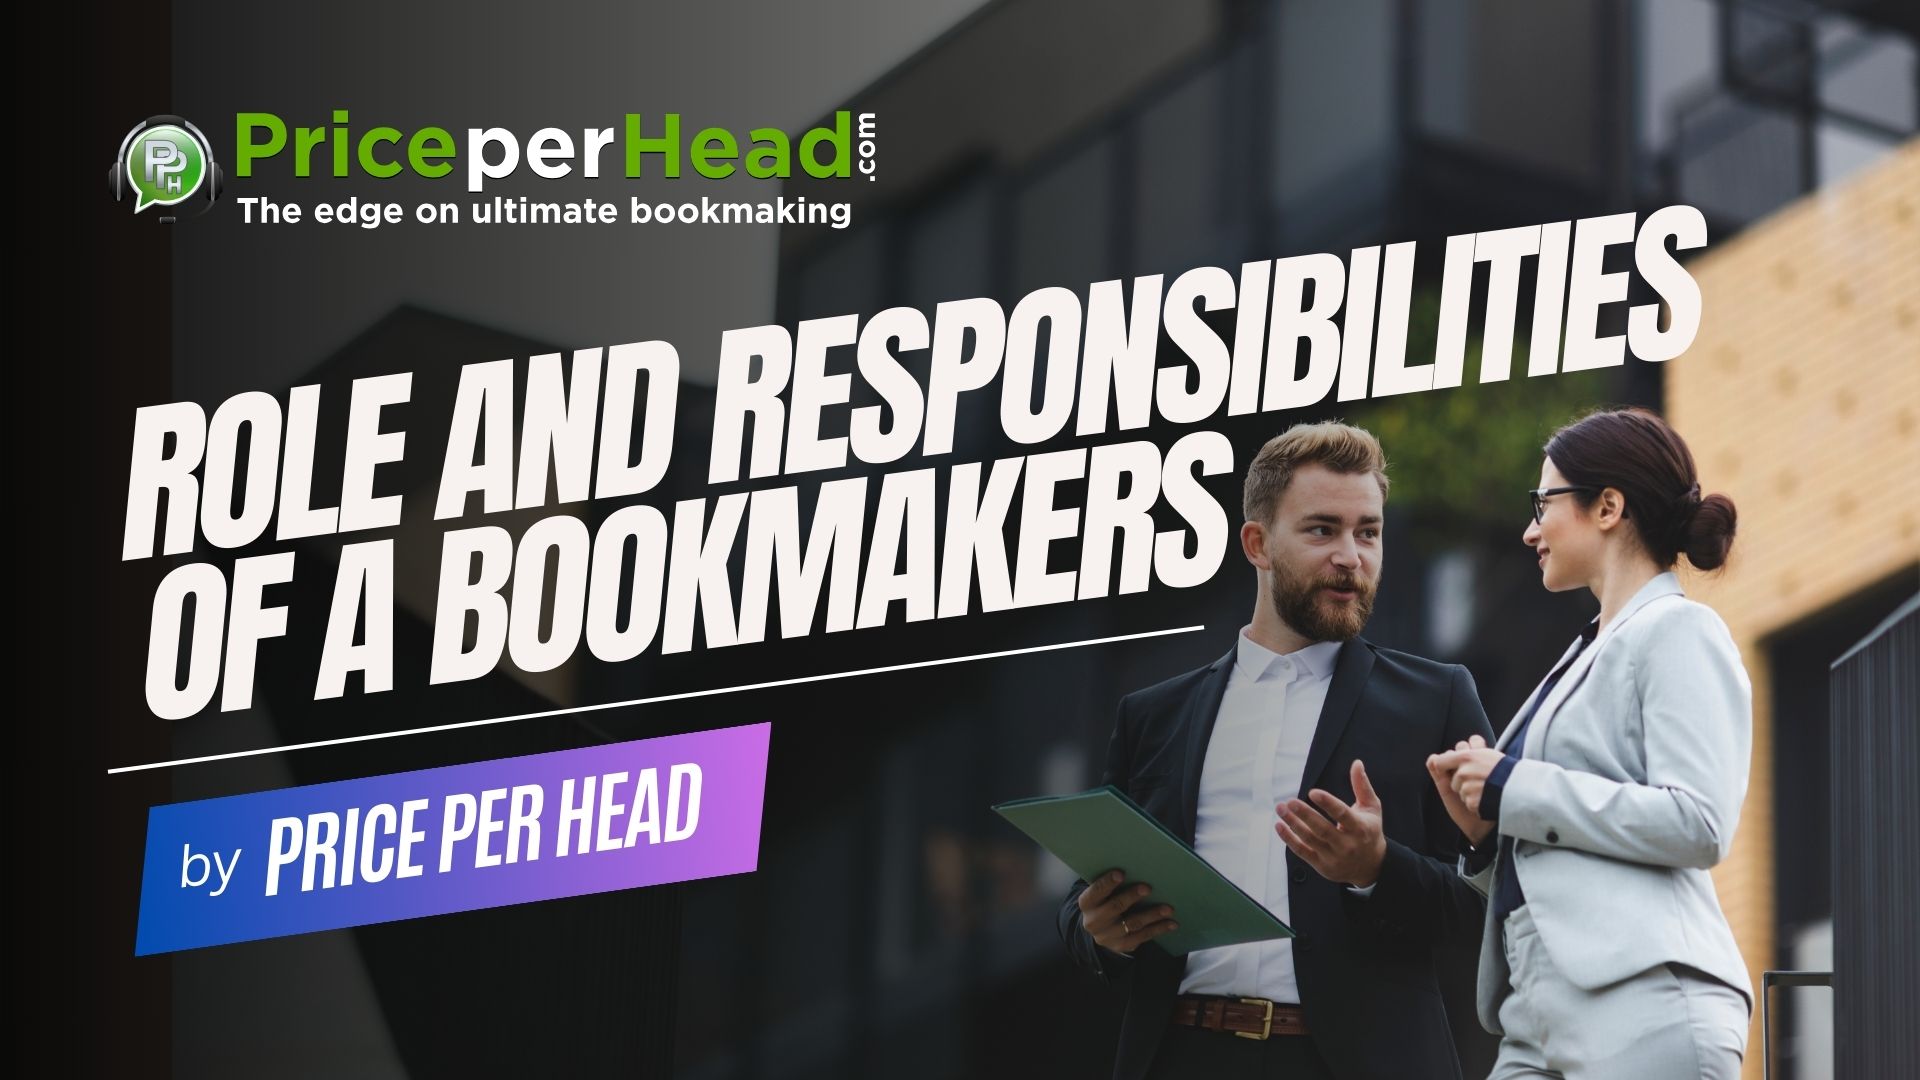 role and responsibilities of a bookmaker, pay per head service, price per head